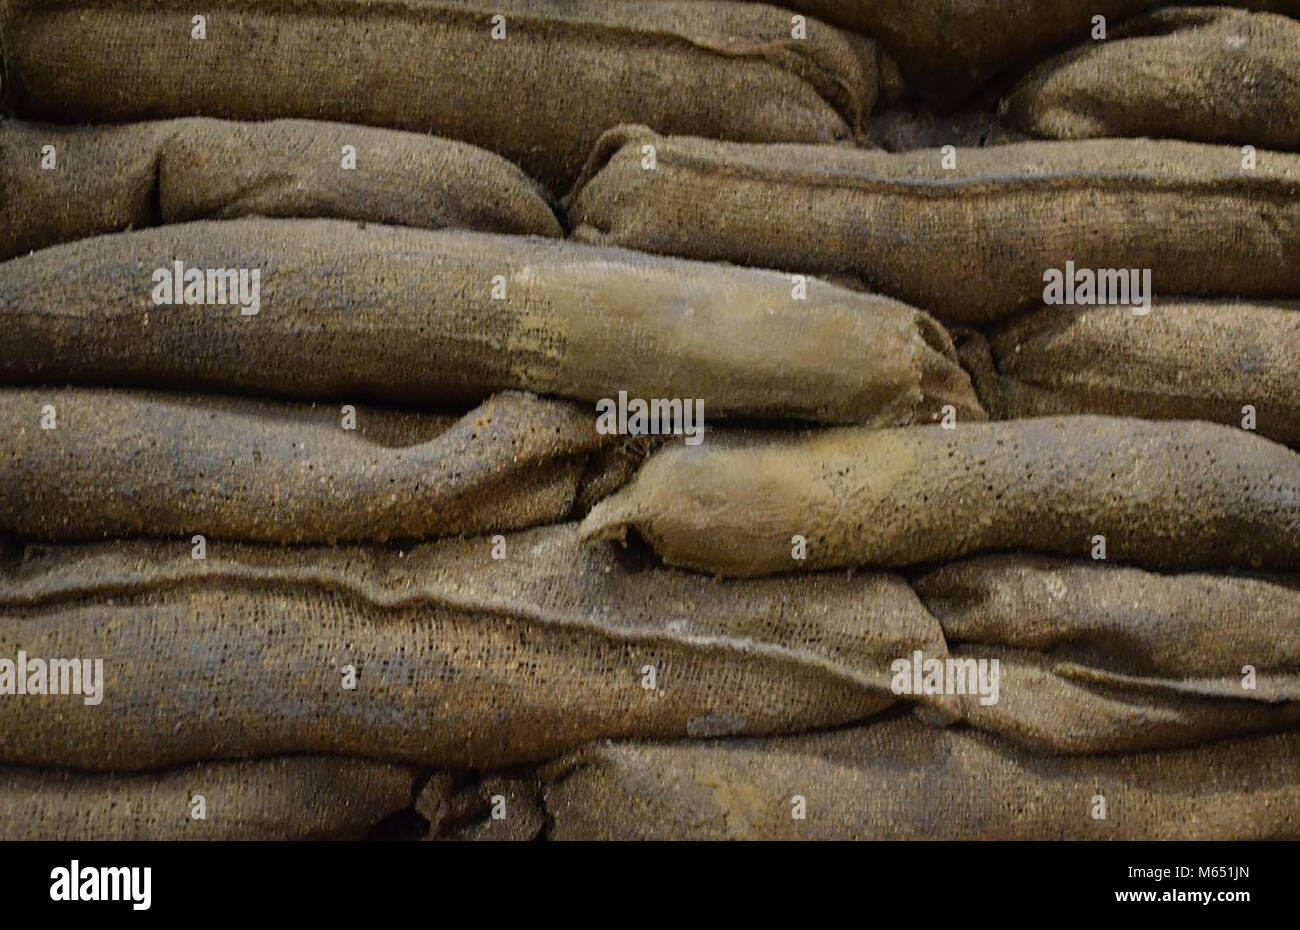 A stack of British wartime hessian sandbags Stock Photo